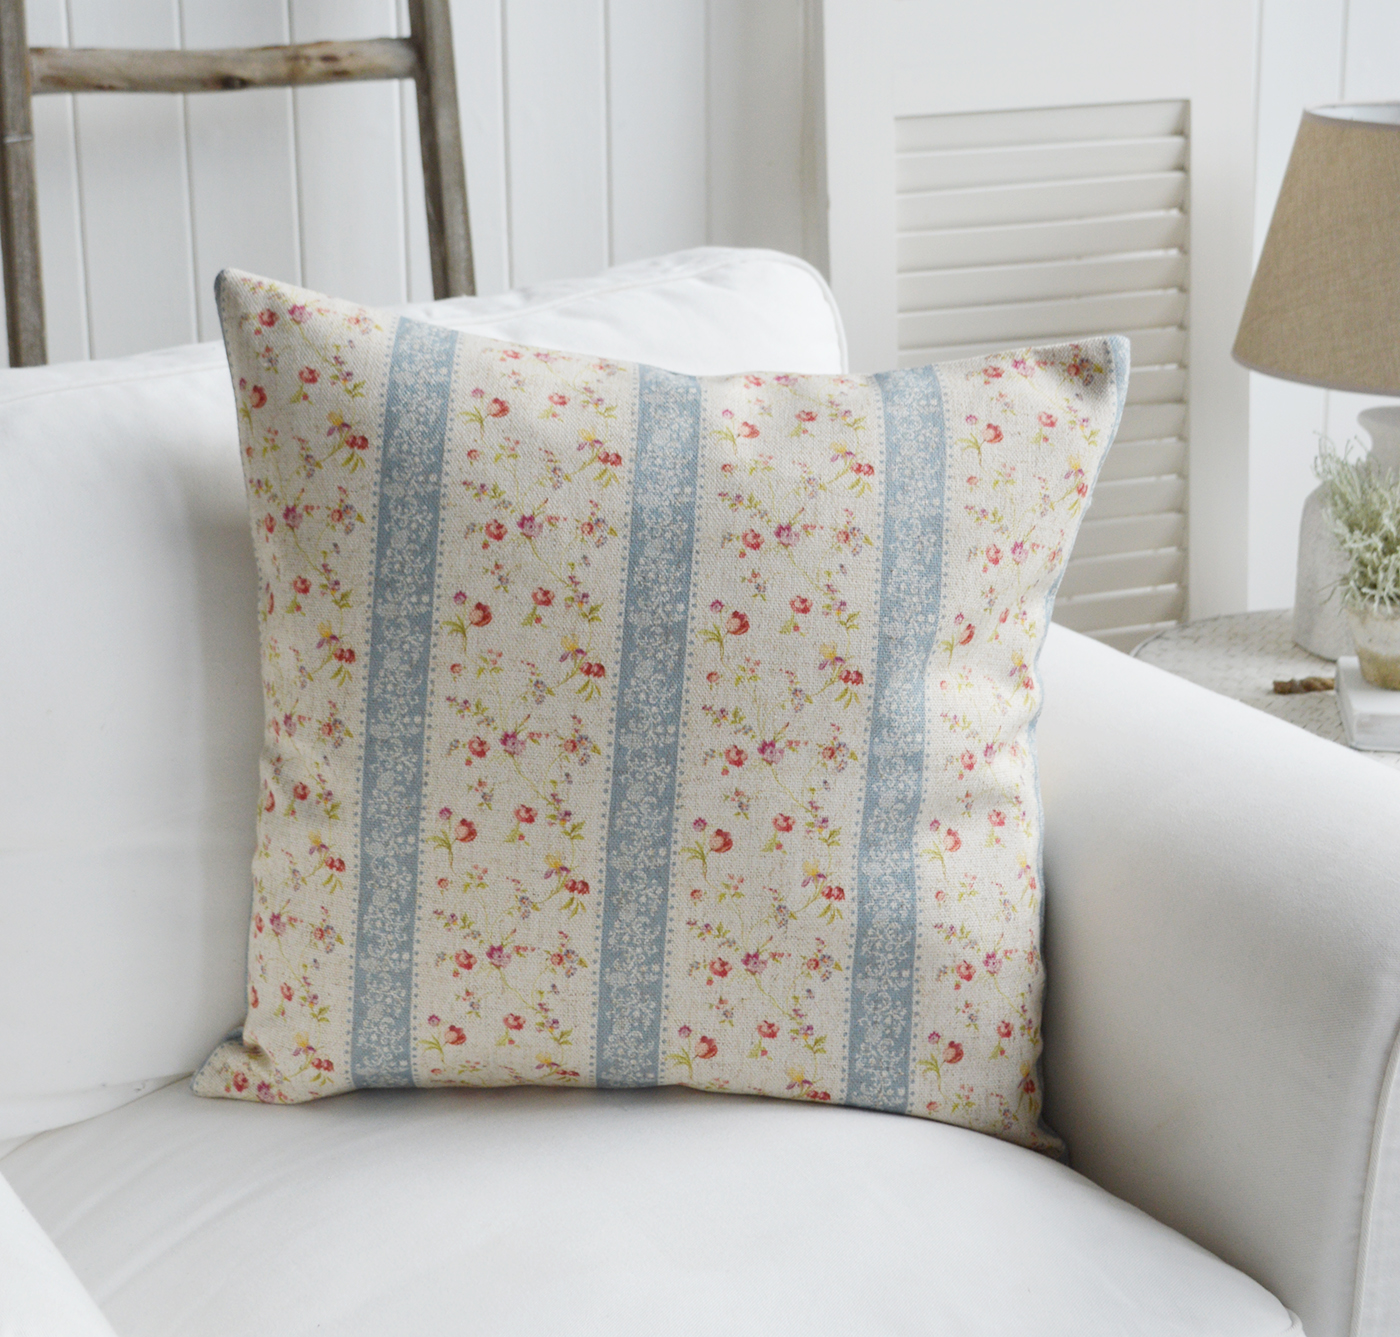 Vintage style New England cushion for coastal, modernfarmhouse and country homes and interiors